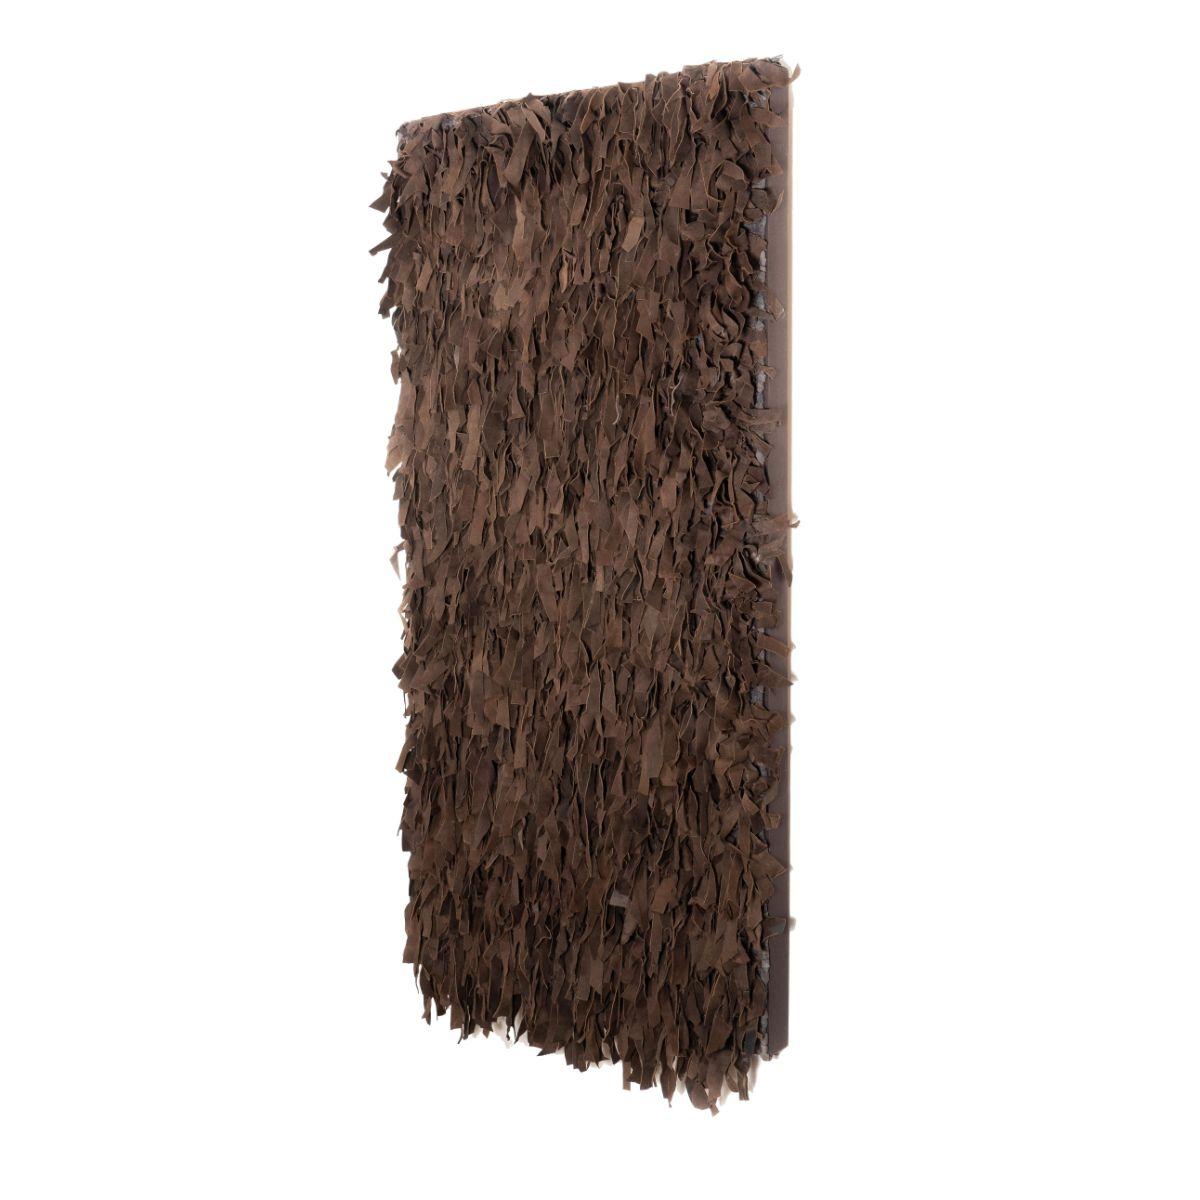 Coffee brown wall hanging of coffee brown sueded leather strips. The strips of suede are in randomized lengths and widths and have been woven into a cotton backing. The hanging has been stitched onto a canvas and mounted on a stretcher.
Mid 20th